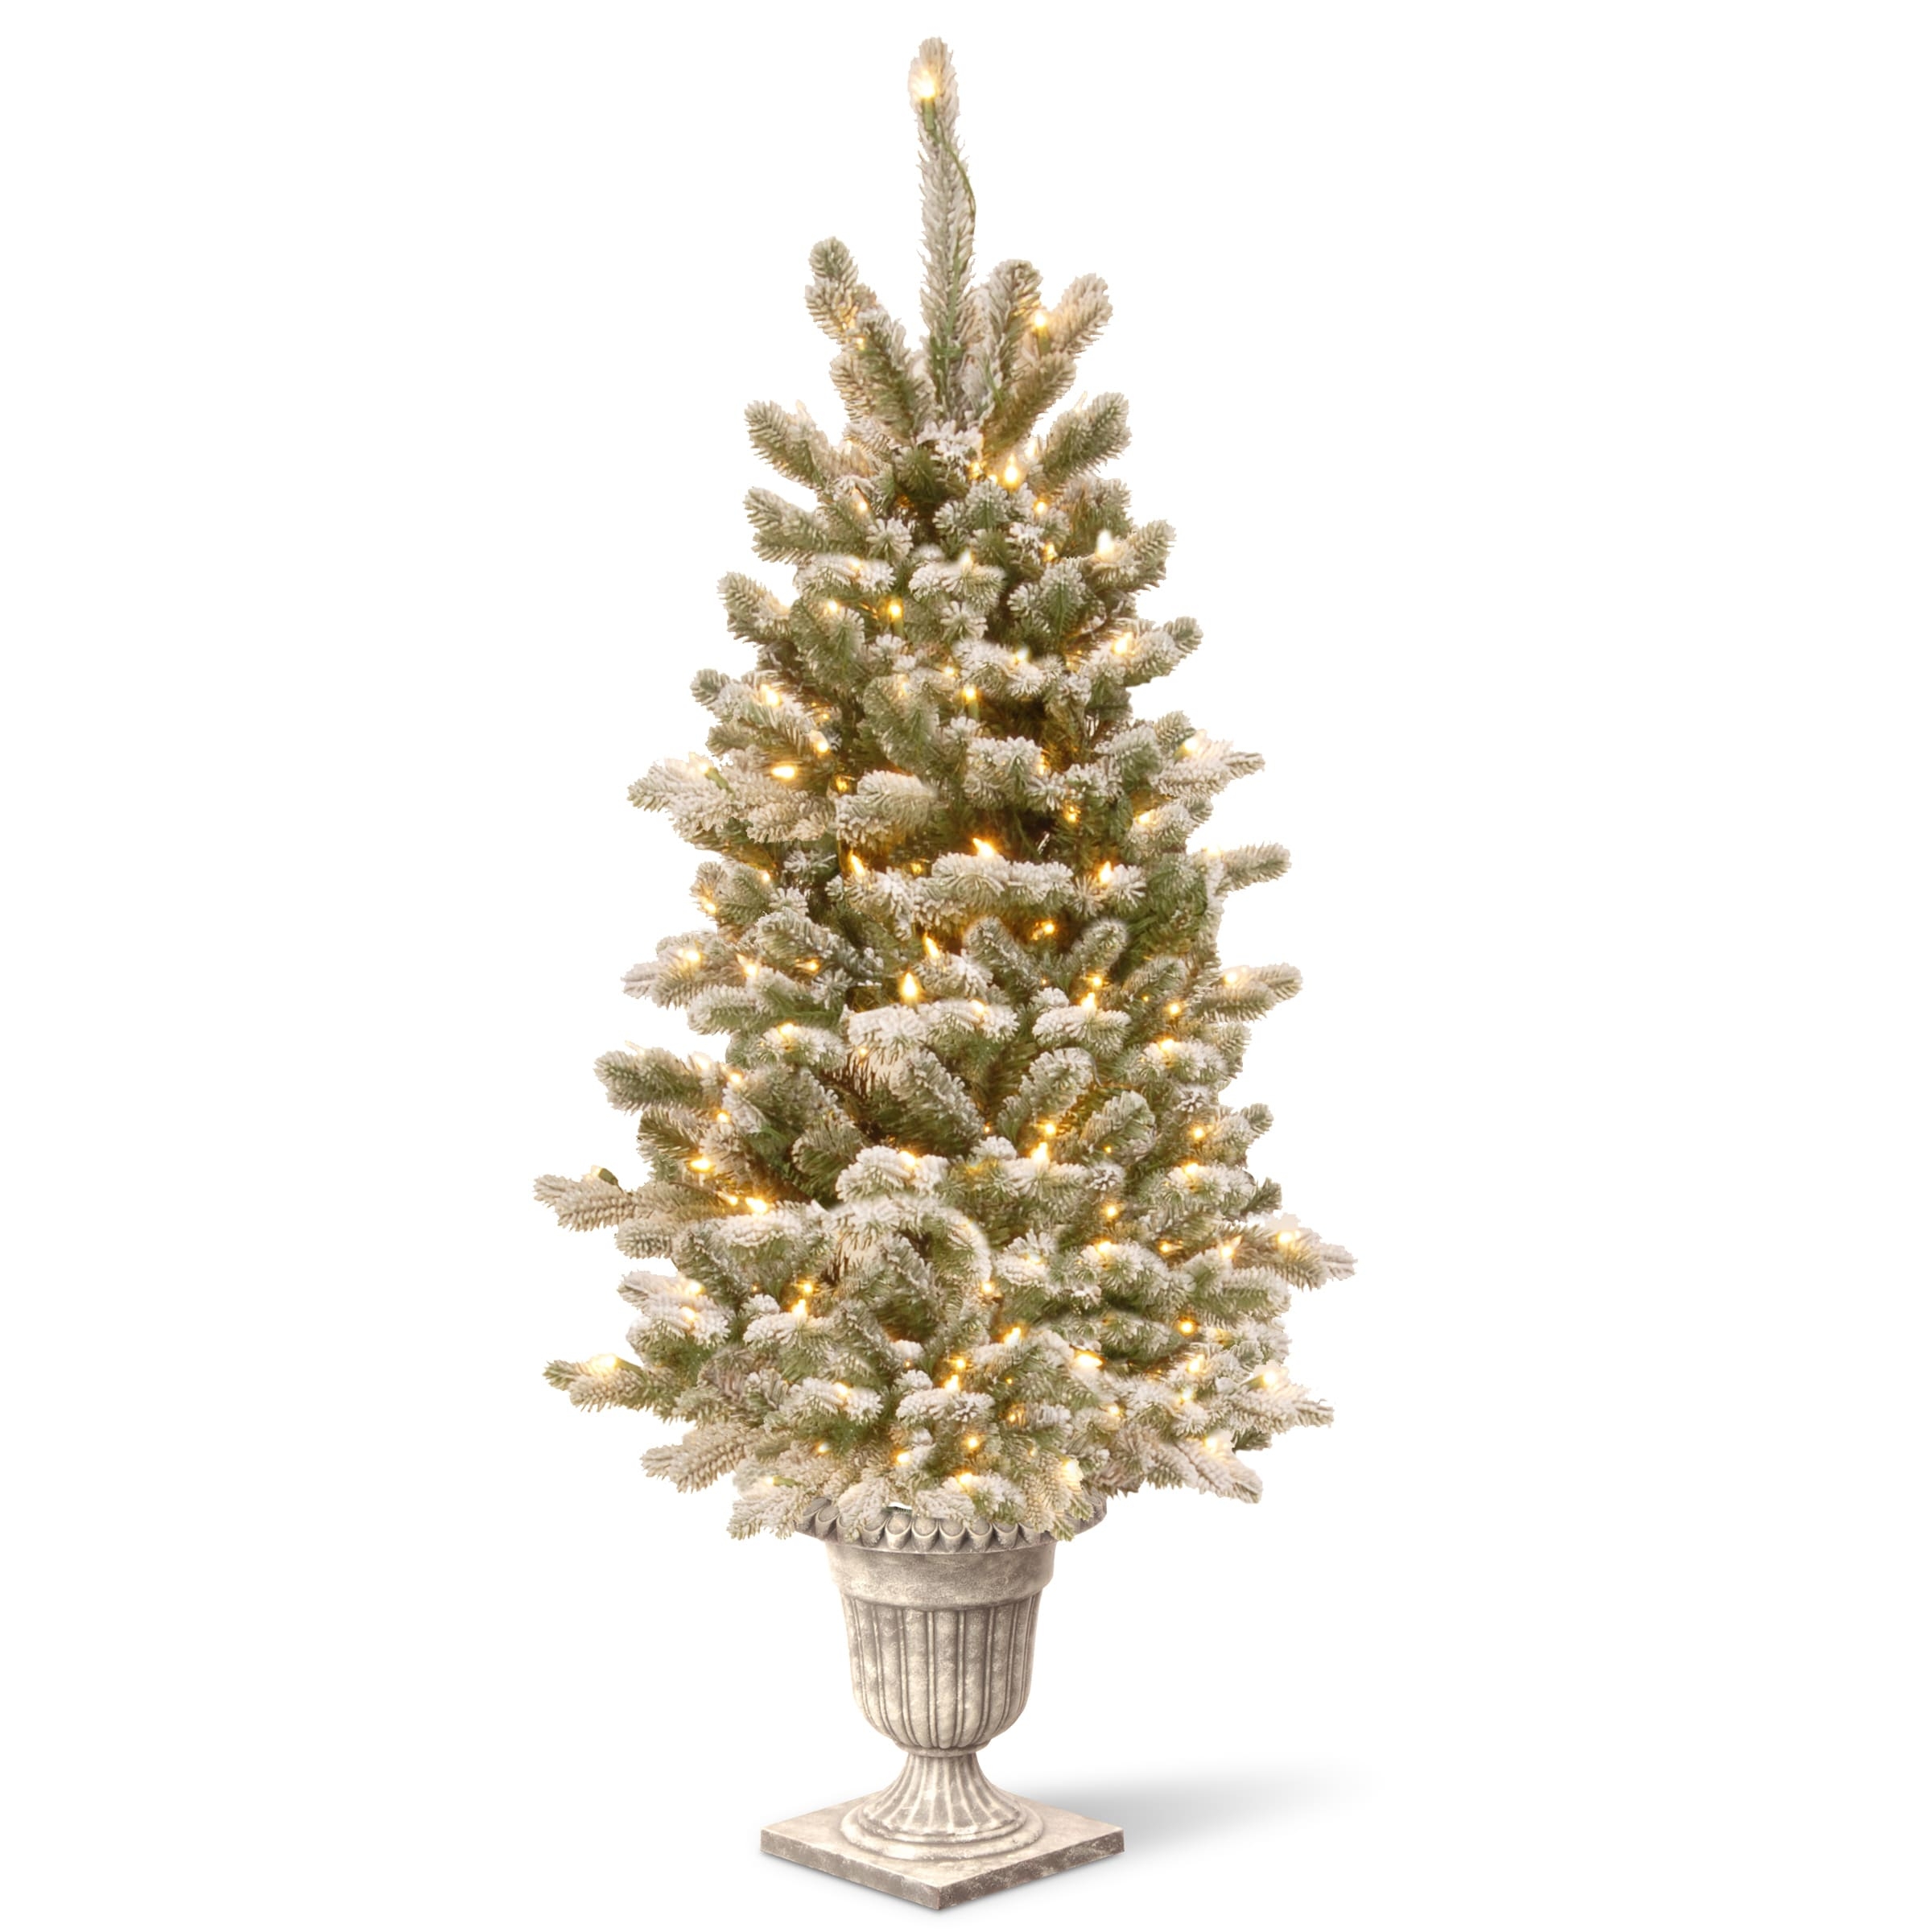 4' White/Green Spruce Trees Artificial Christmas Tree with Clear/White Lights